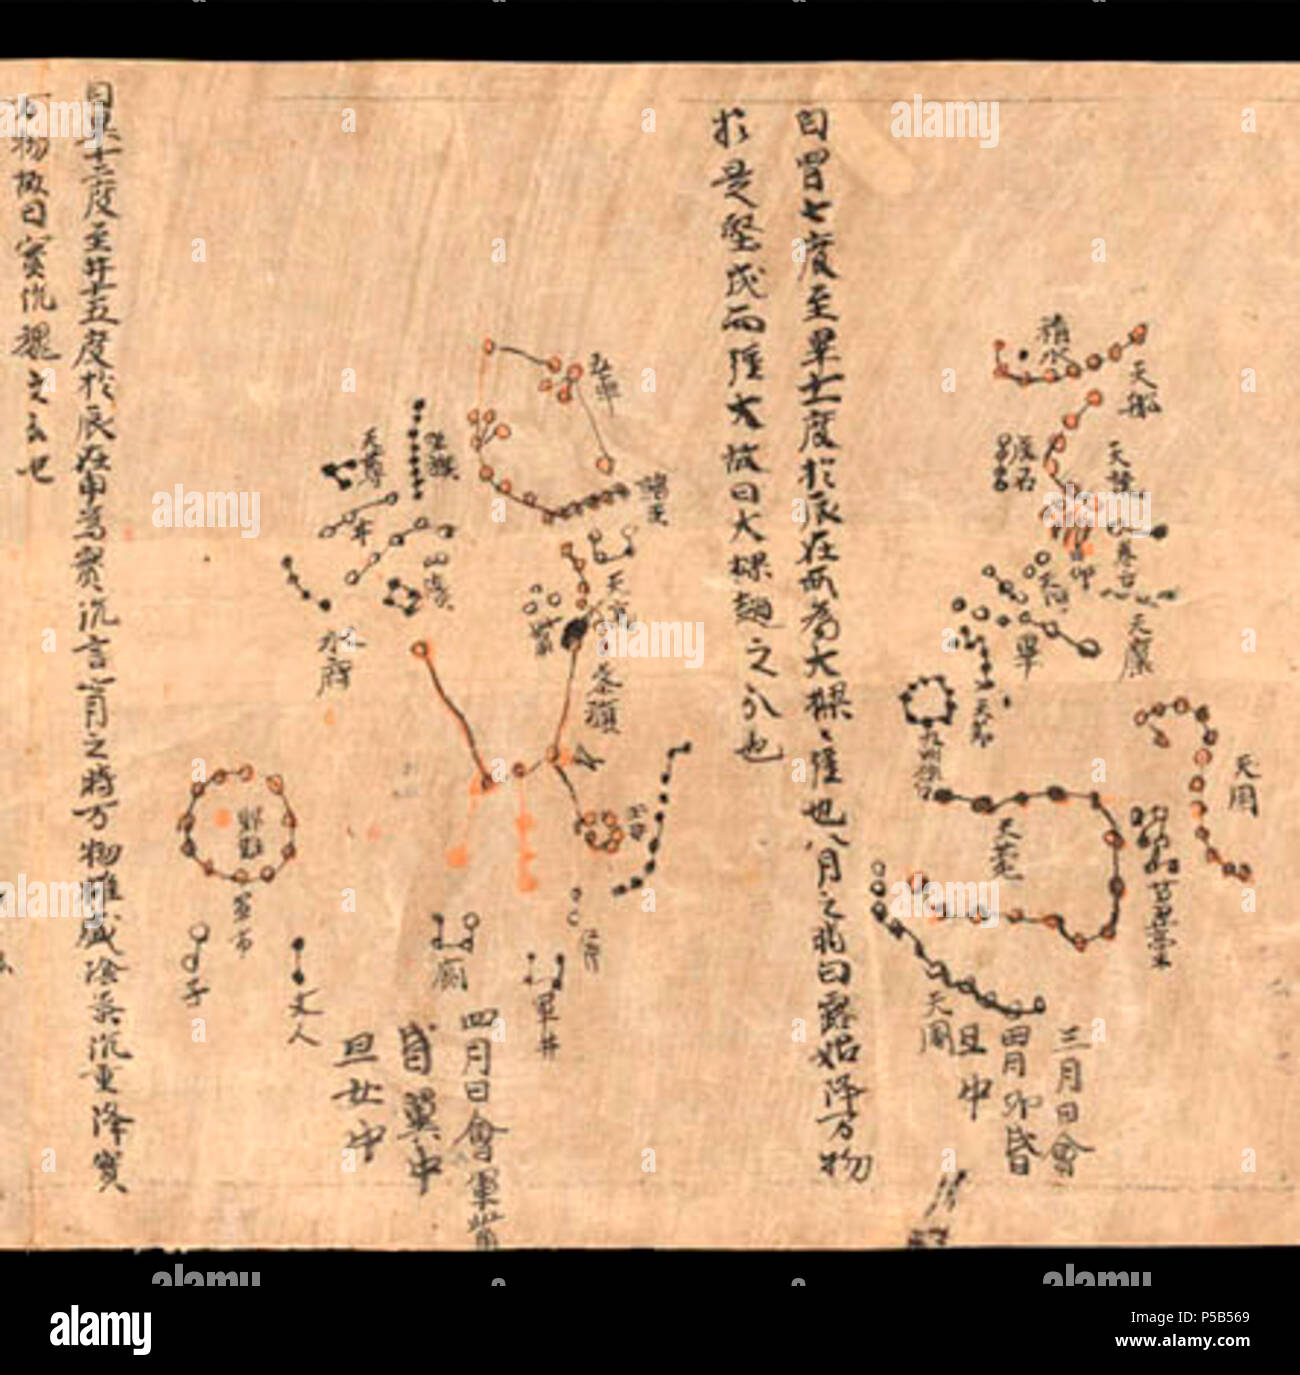 N/A. English: A segment of the Dunhuang star map from around AD 700 AD. British Library Or.8210/S.3326 showing the Third and Fourth lunar months, with the constellation of Orion to the left along with the stars Betelgeuse, Rigel, Bellatrix, Saiph , the three stars that compose Orion's belt - Alnitak, Alnilam and Mintaka, along with the Orion Nebula. turn of the 7/8th century. Unknown 486 Dunhuang Star Atlas - Orion Stock Photo